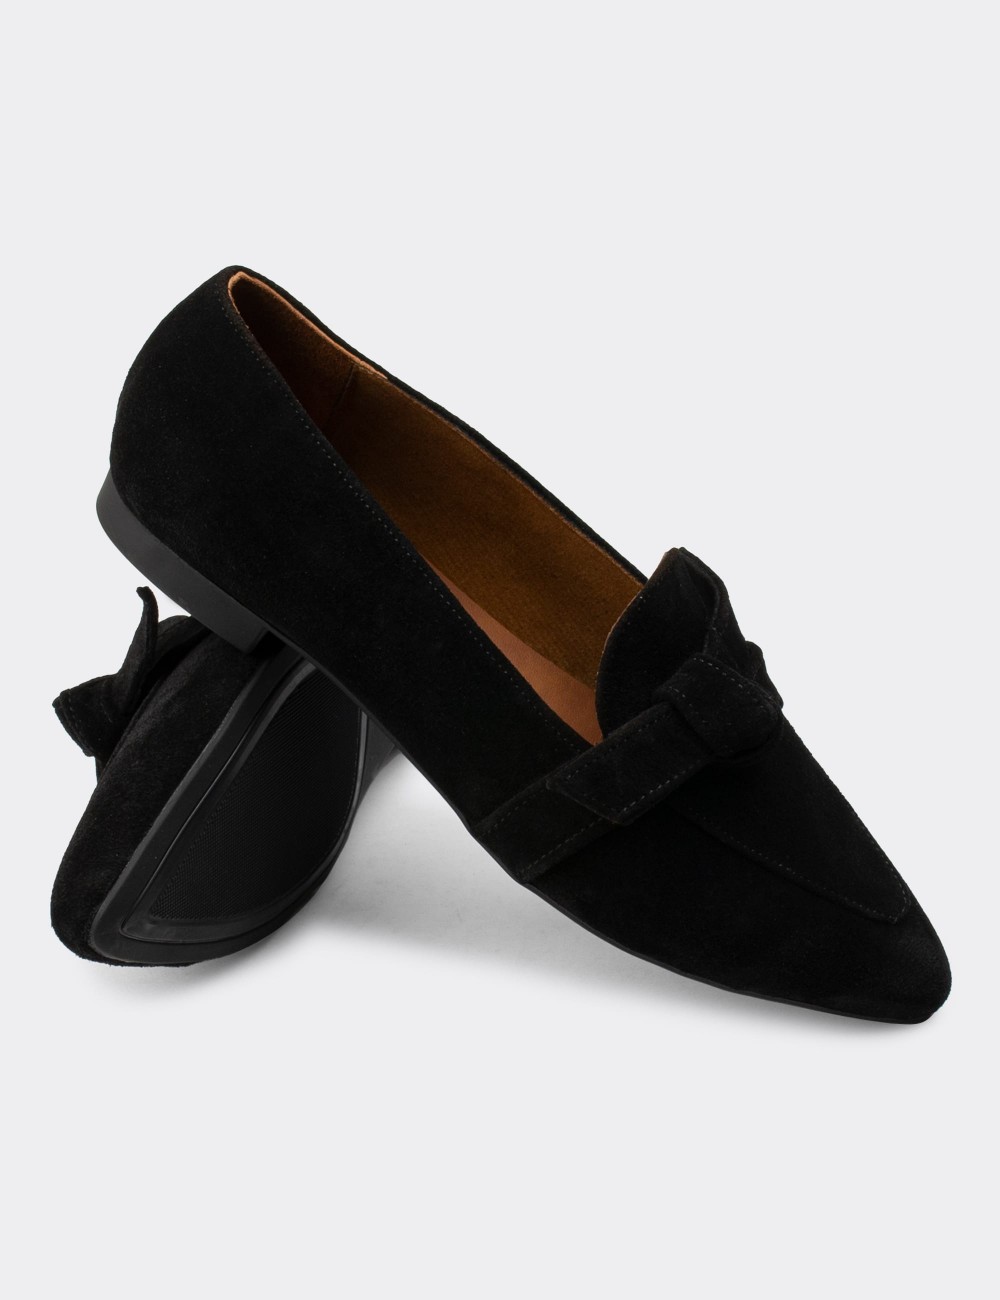 Black Suede Leather Loafers - 01898ZSYHC02